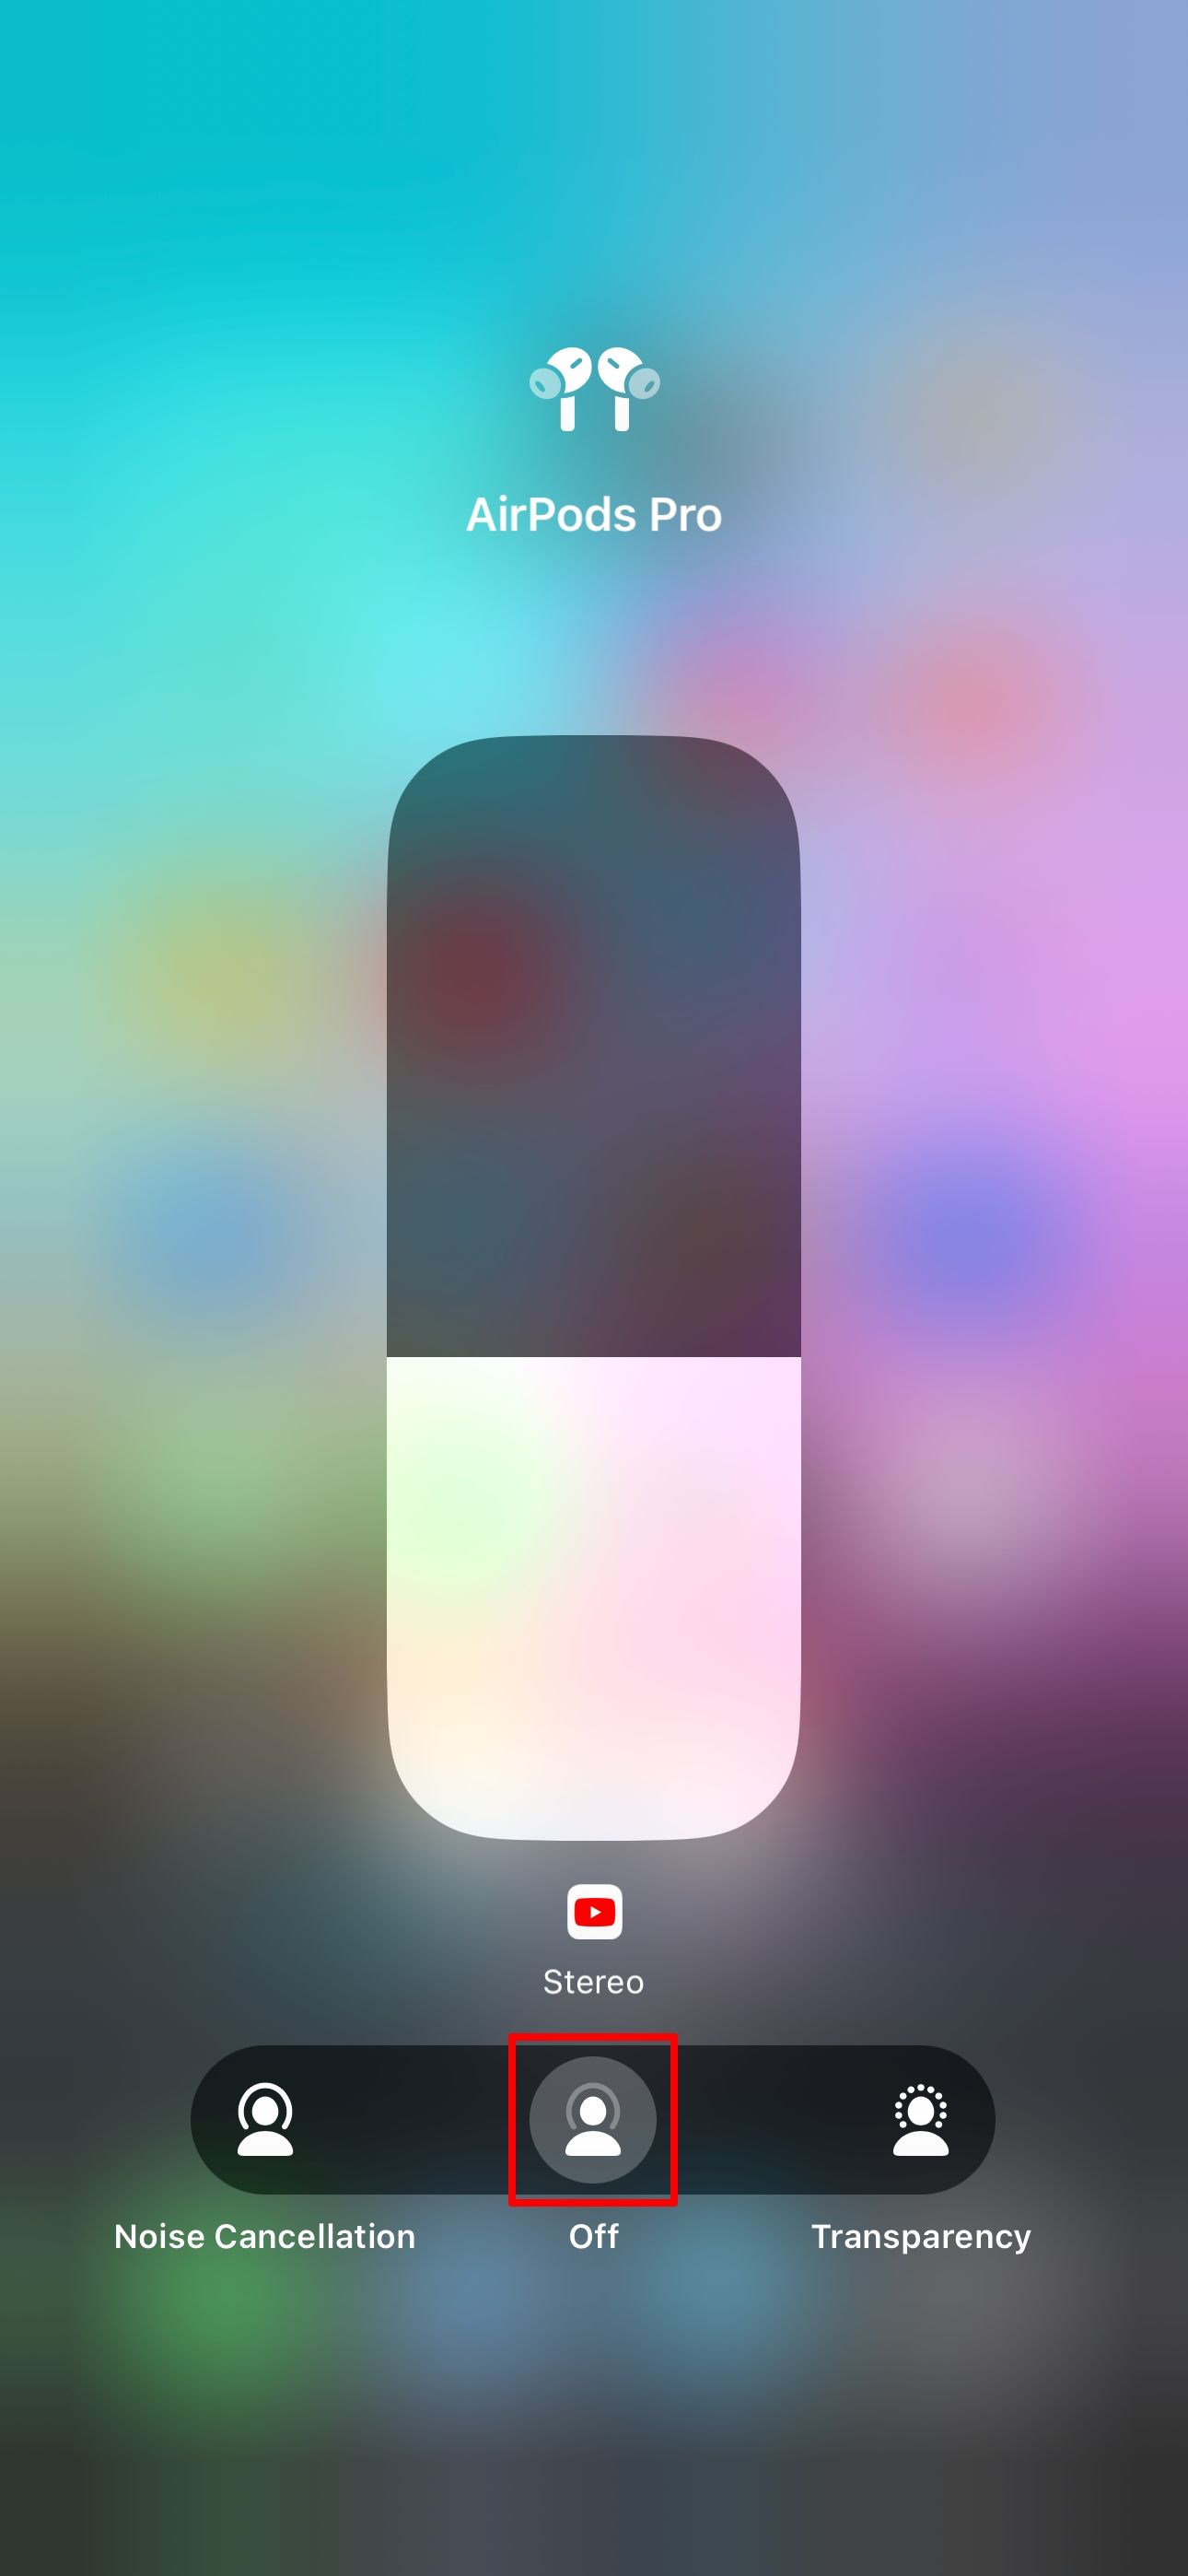 The iPhone Control Center showing AirPods noise cancellation turned off